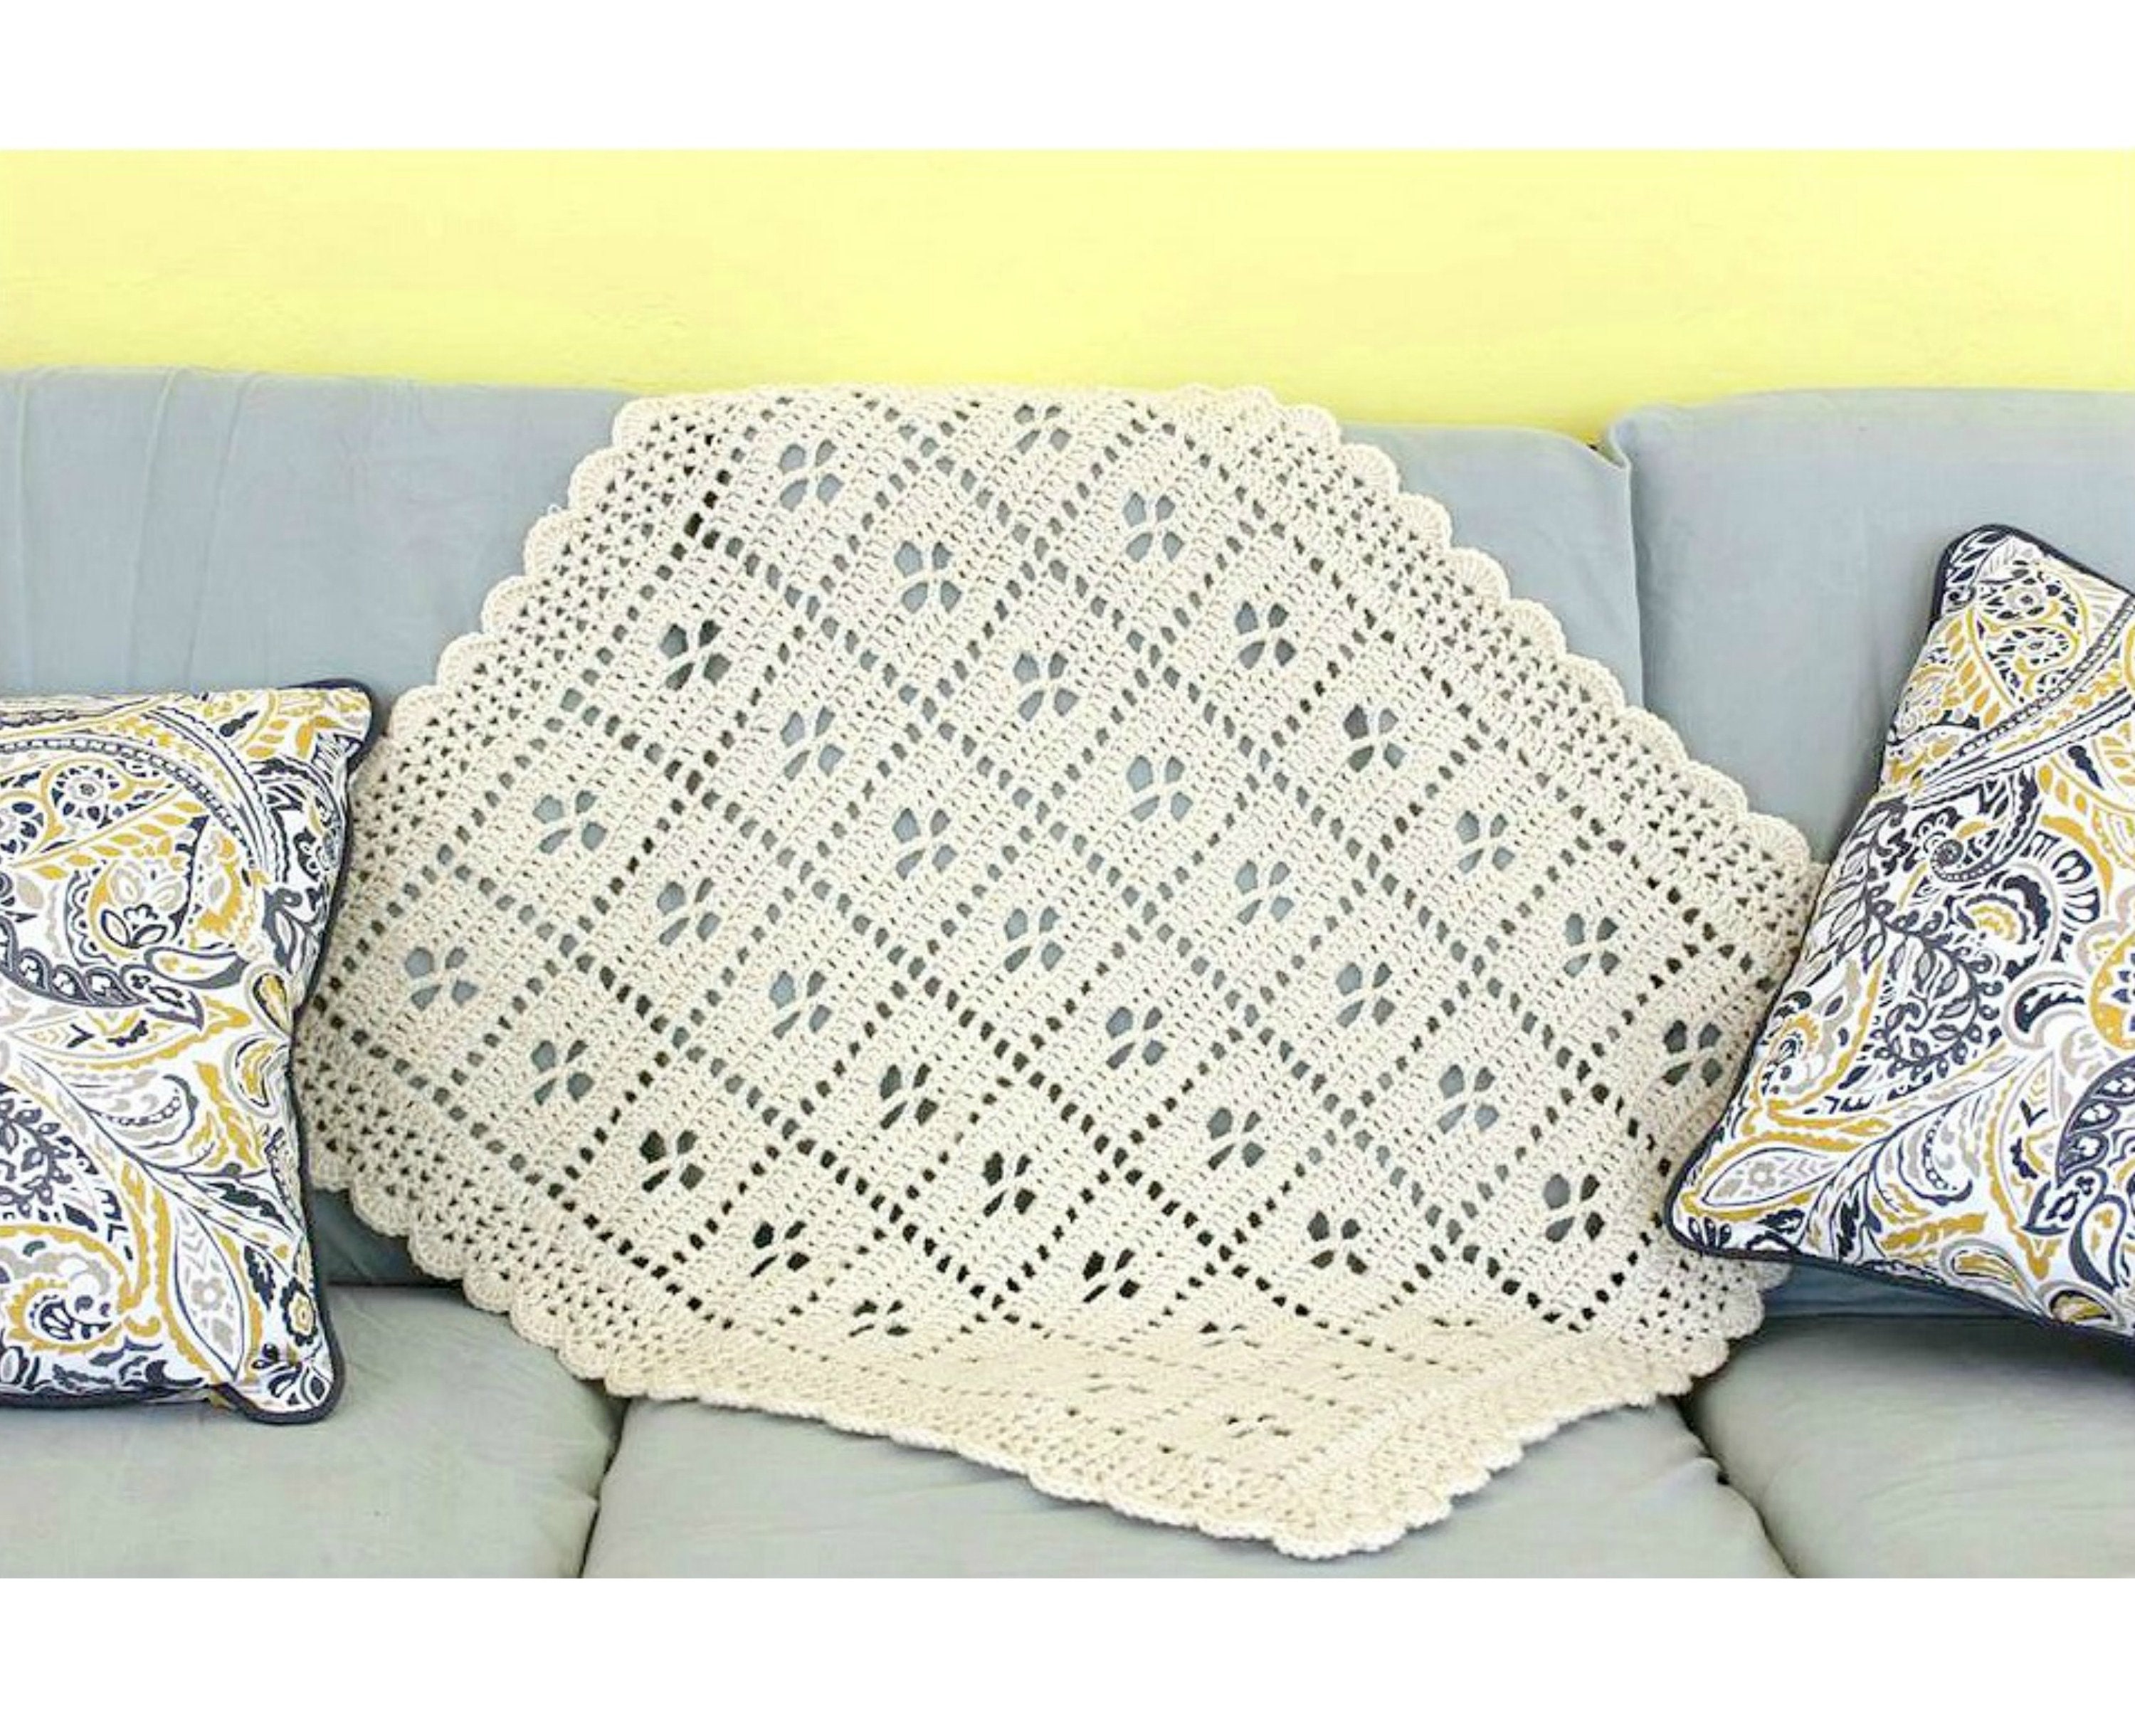 Call the Midwife Afghan Crochet Blanket Pattern pic picture photo